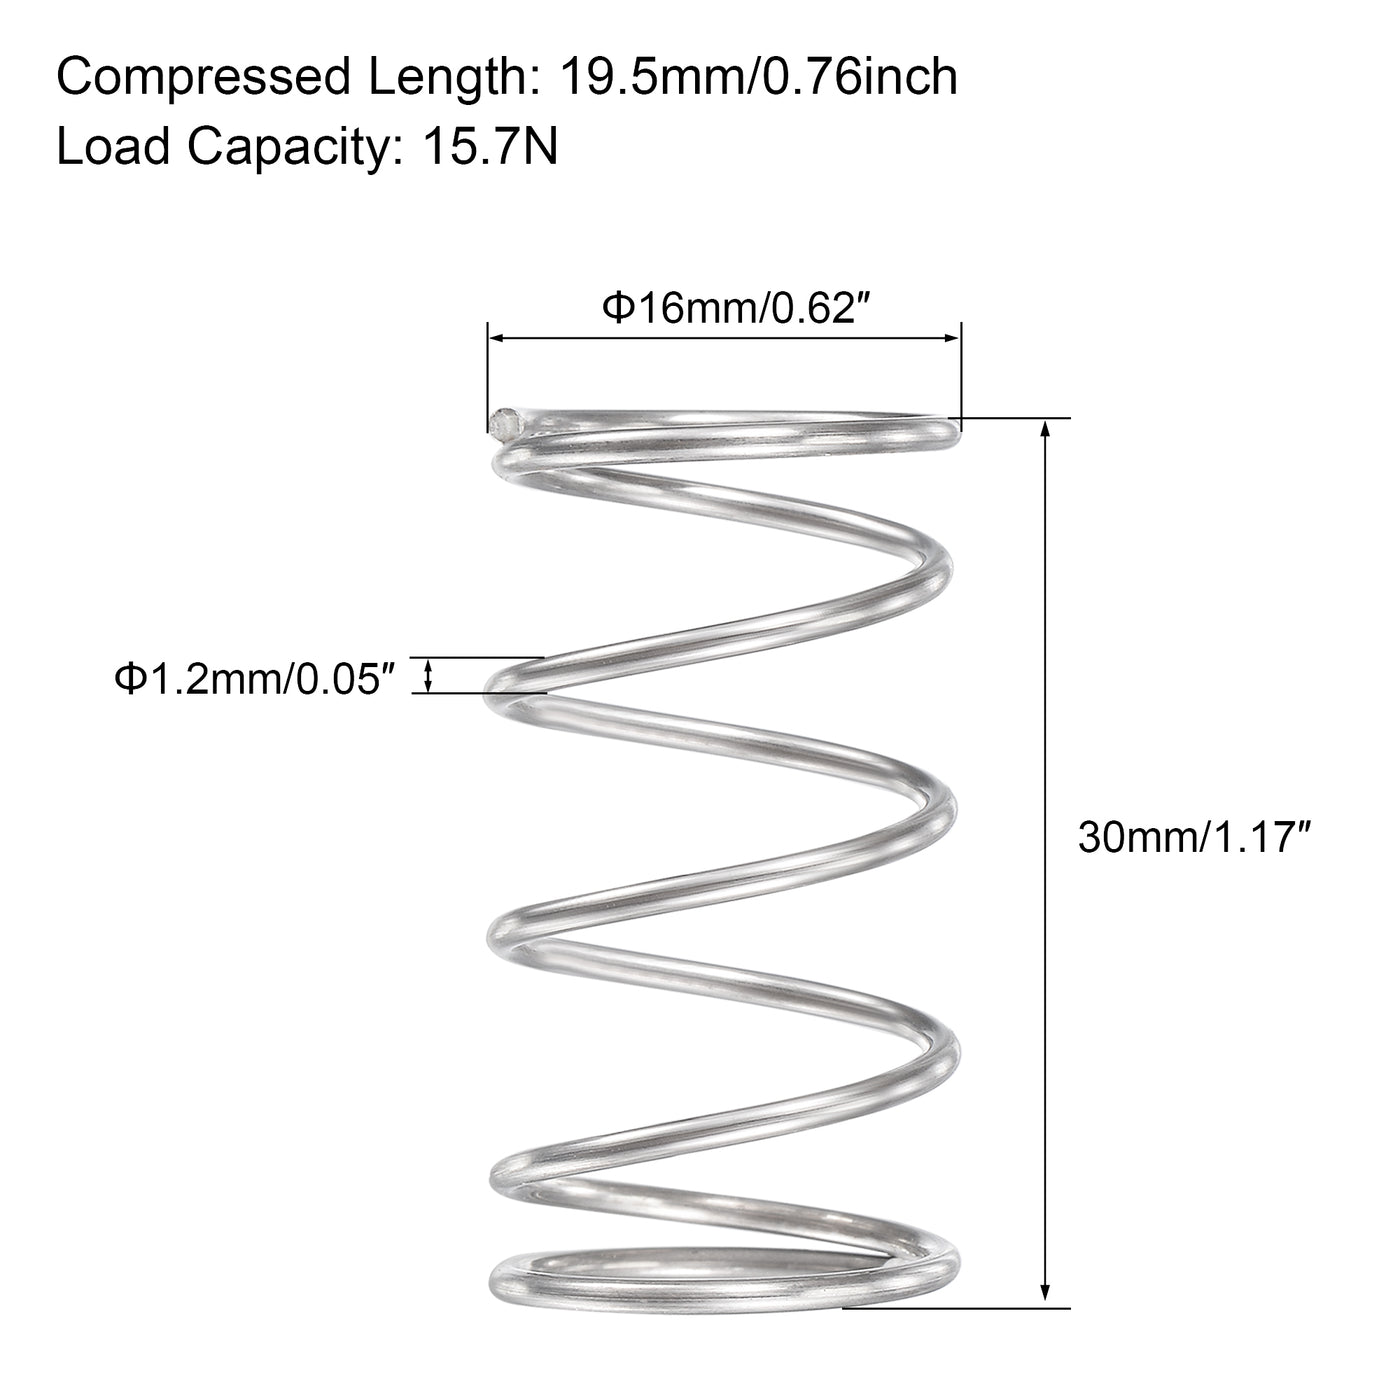 uxcell Uxcell 16mmx1.2mmx30mm 304 Stainless Steel Compression Spring 15.7N Load Capacity 5pcs